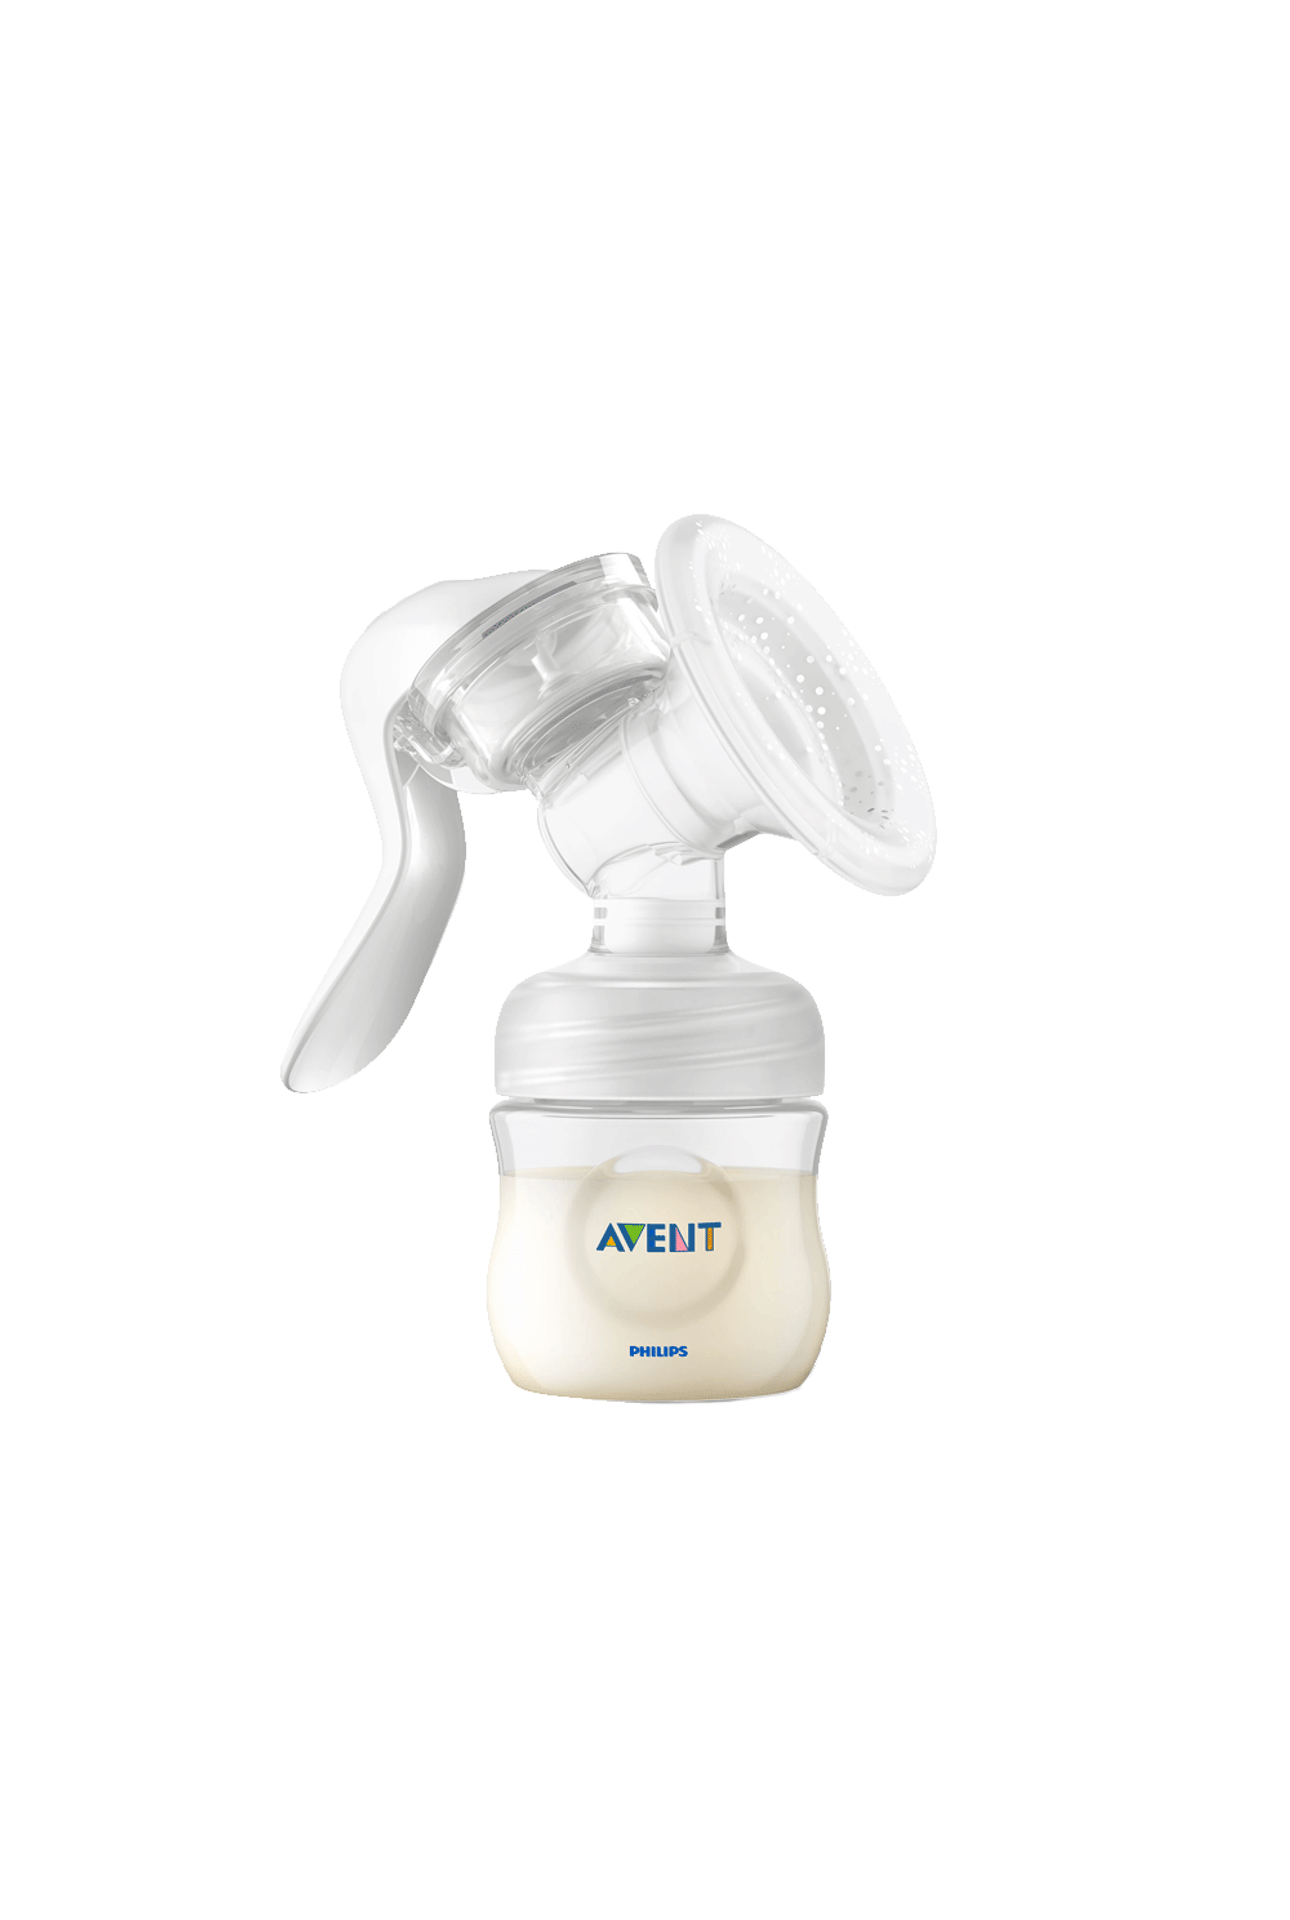 Avent-Extractor-de-Leche-Avent-Manual-Natural-8710103943952_img1